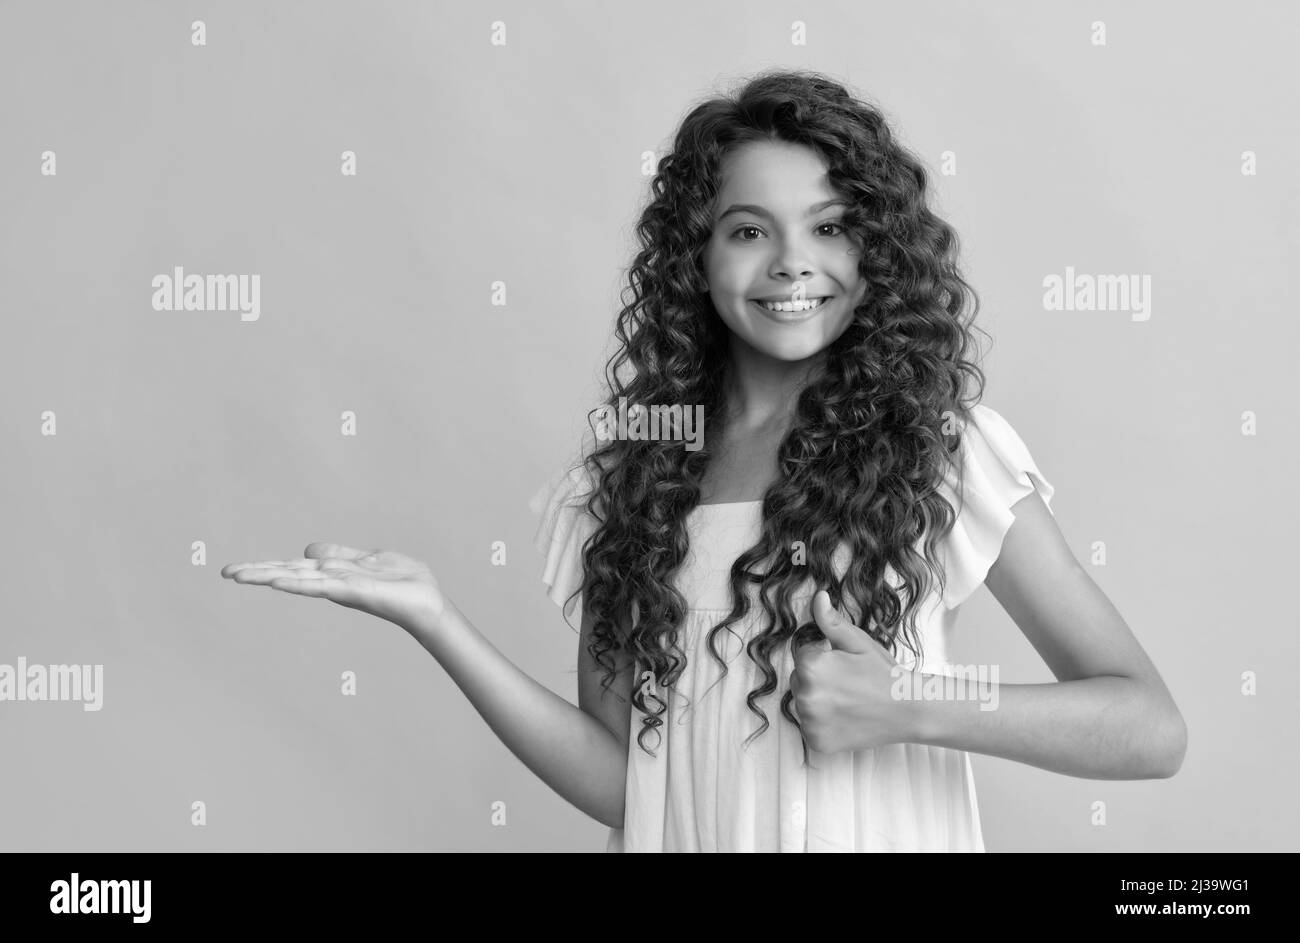 happy kid with long curly hair and skin presenting product show thumb up, copy space, advertisement. Stock Photo